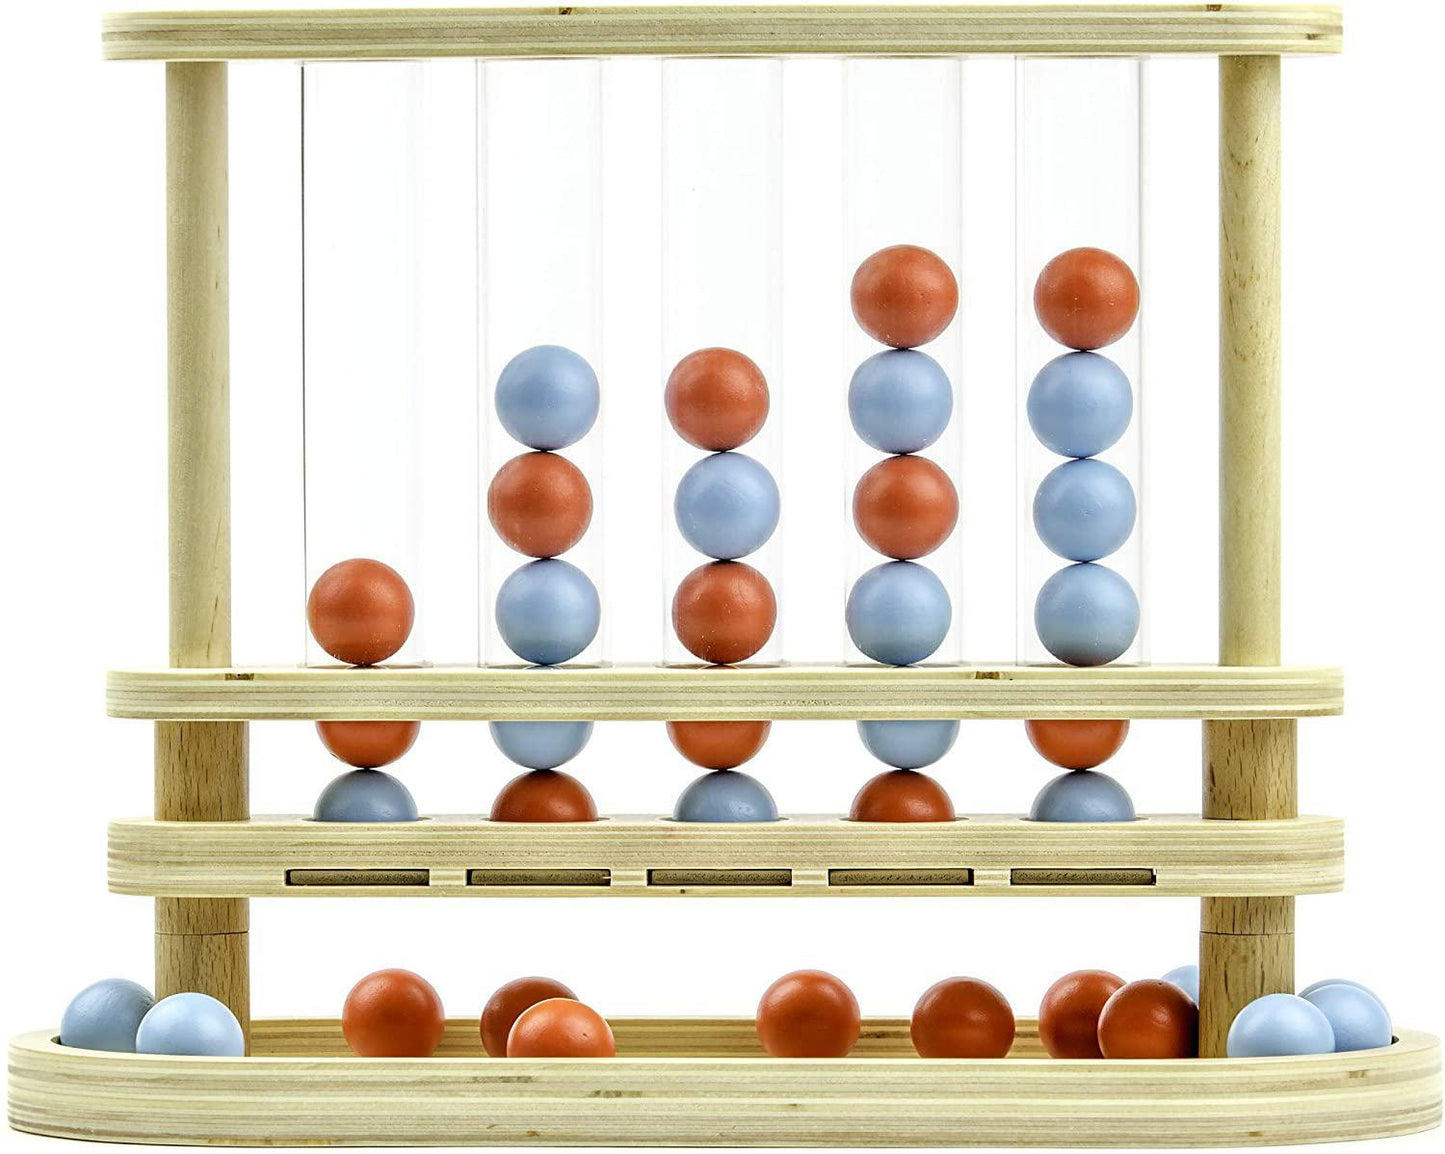 New Interactive Game Marbles Newton Interactive Game, Line up five balls of the same color and you win!